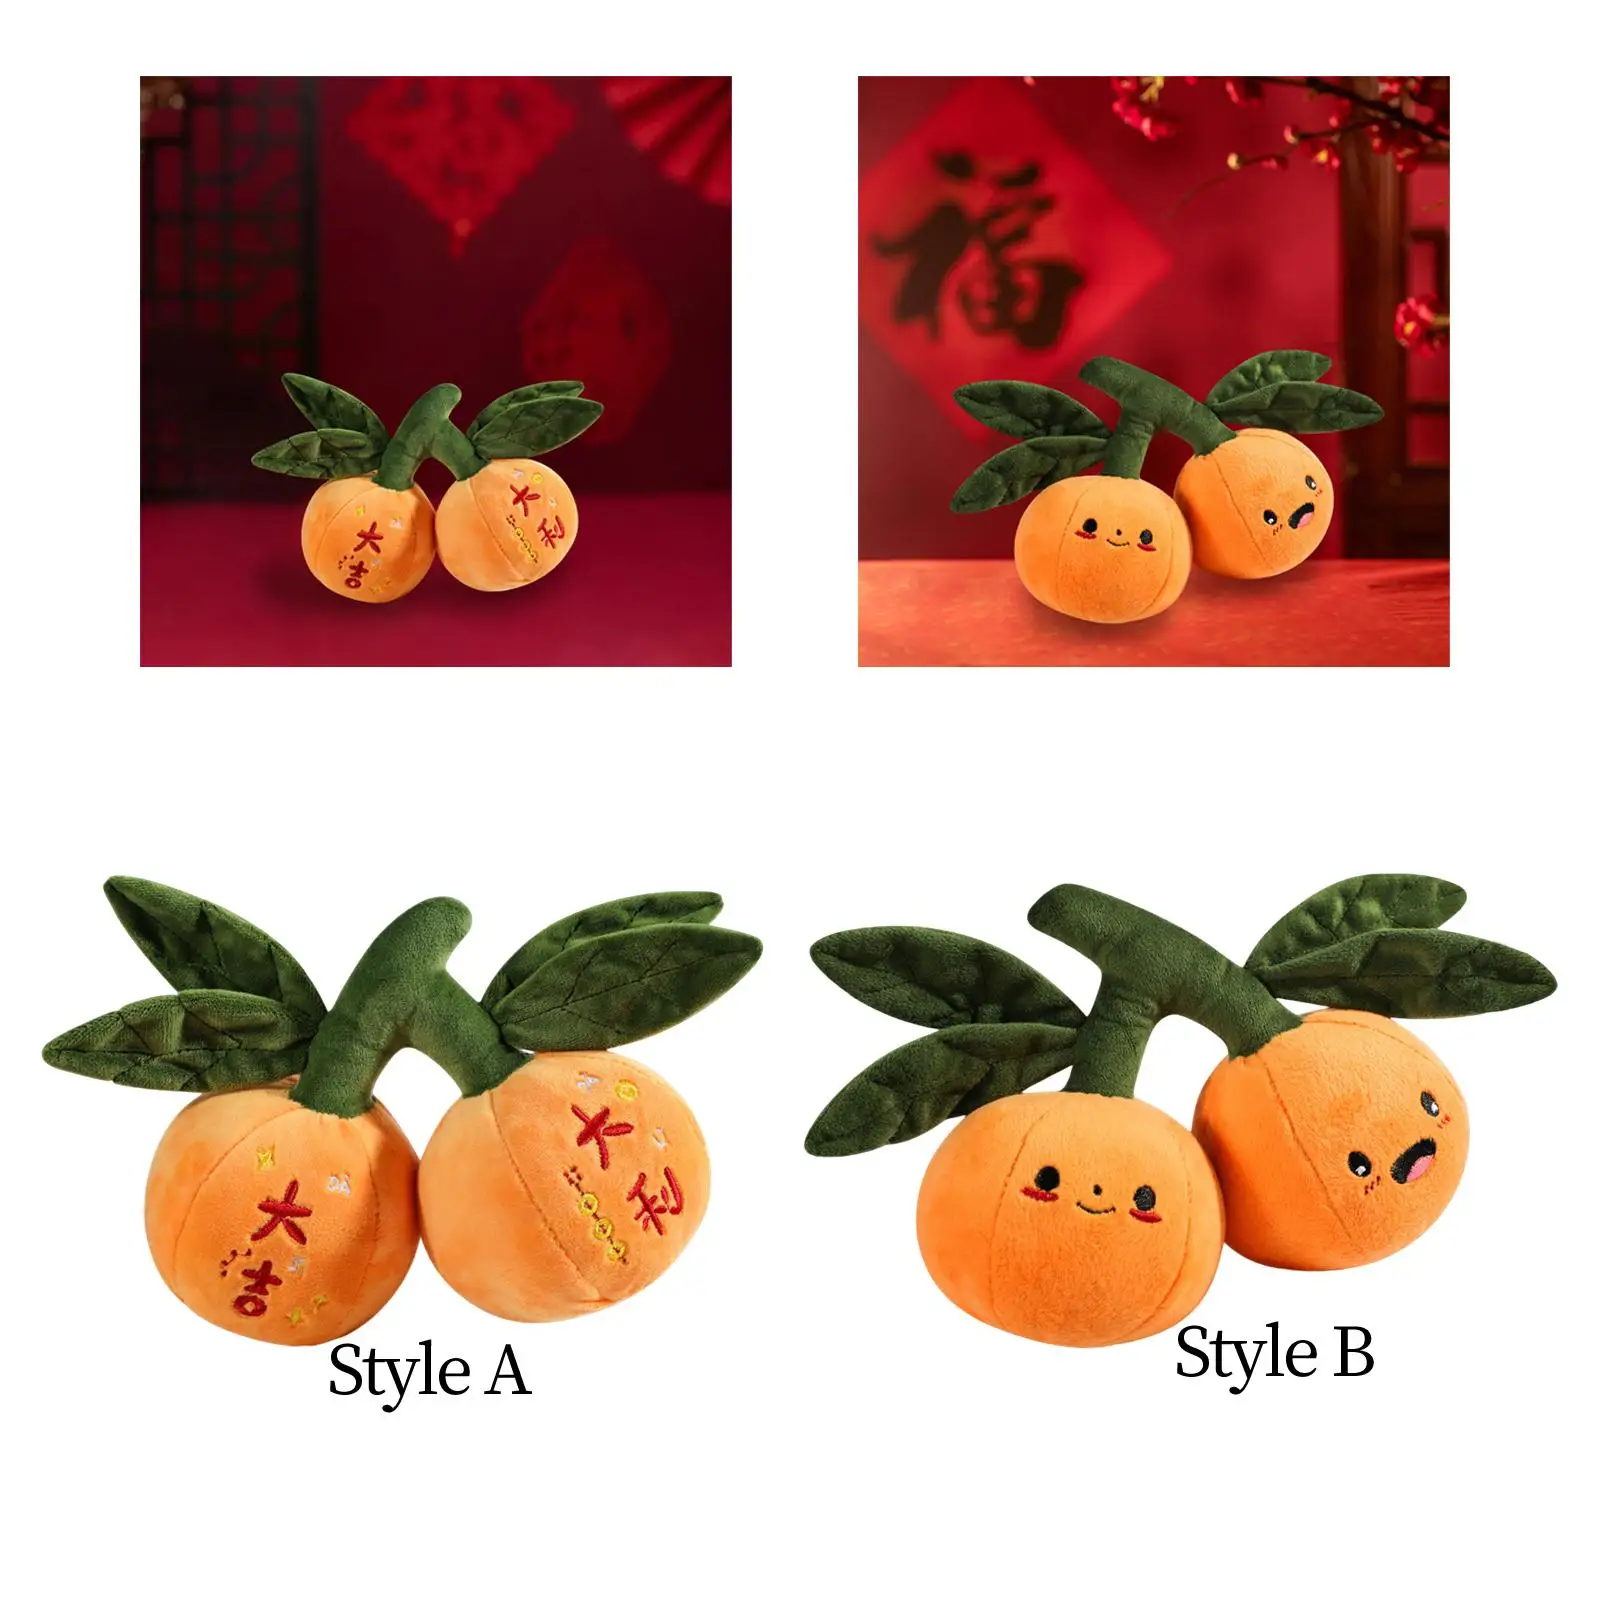 Stuffed Tangerine Toys Gifts Pretend Play Game for Car Bedroom Decorative